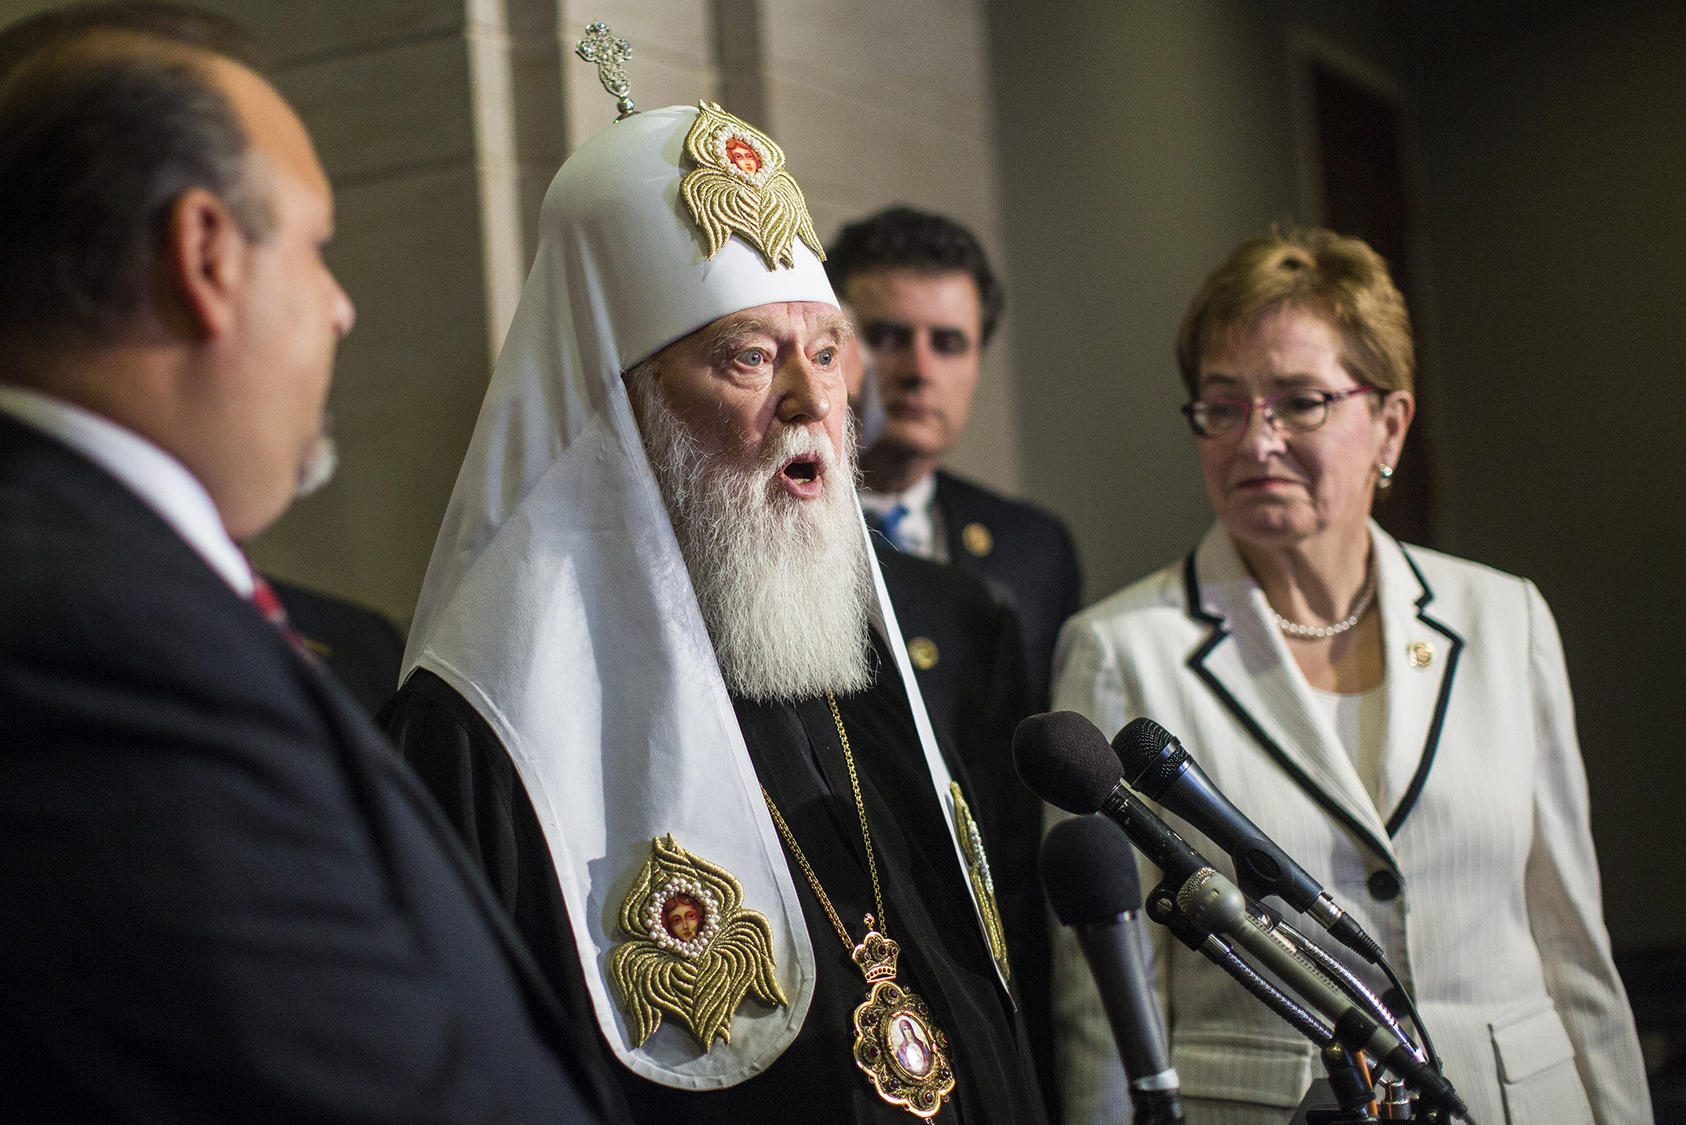 Patriarch Filaret, center, heads the Ukrainian Orthodox Church-Kyiv Patriarchate, the largest Ukrainian congregation seeking independence from Moscow. He spoke in Washington in 2015. (Jabin Botsford/The New York Times)